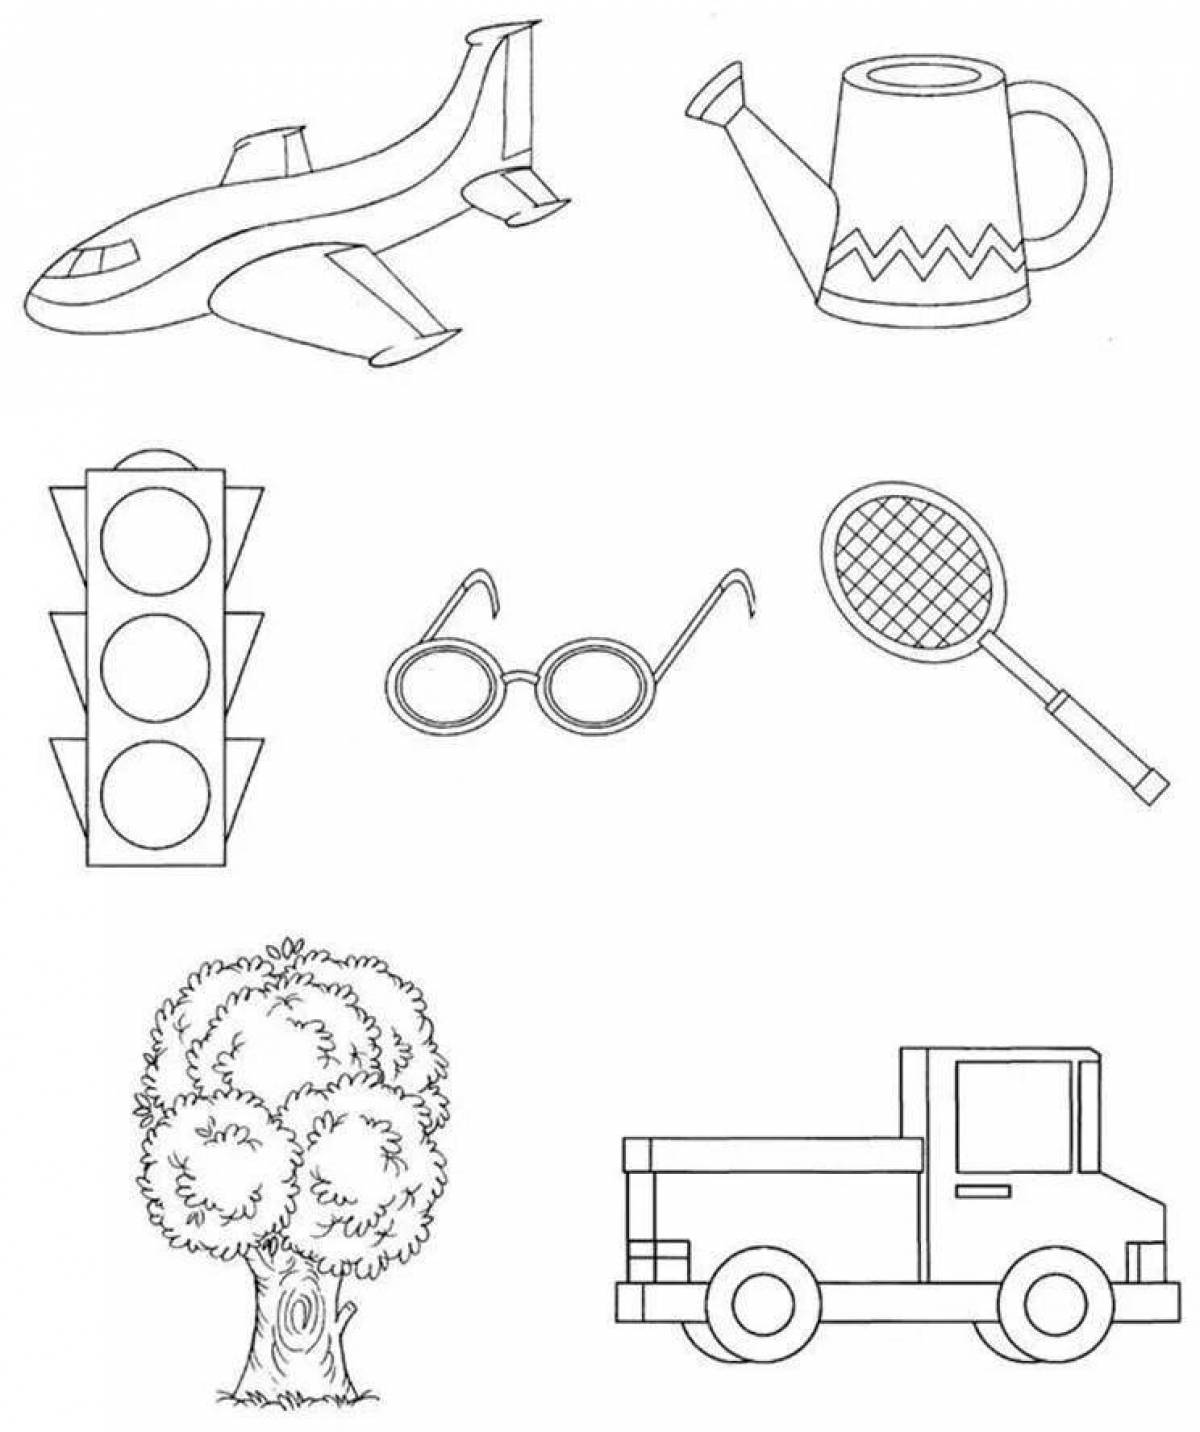 Dazzling coloring pages